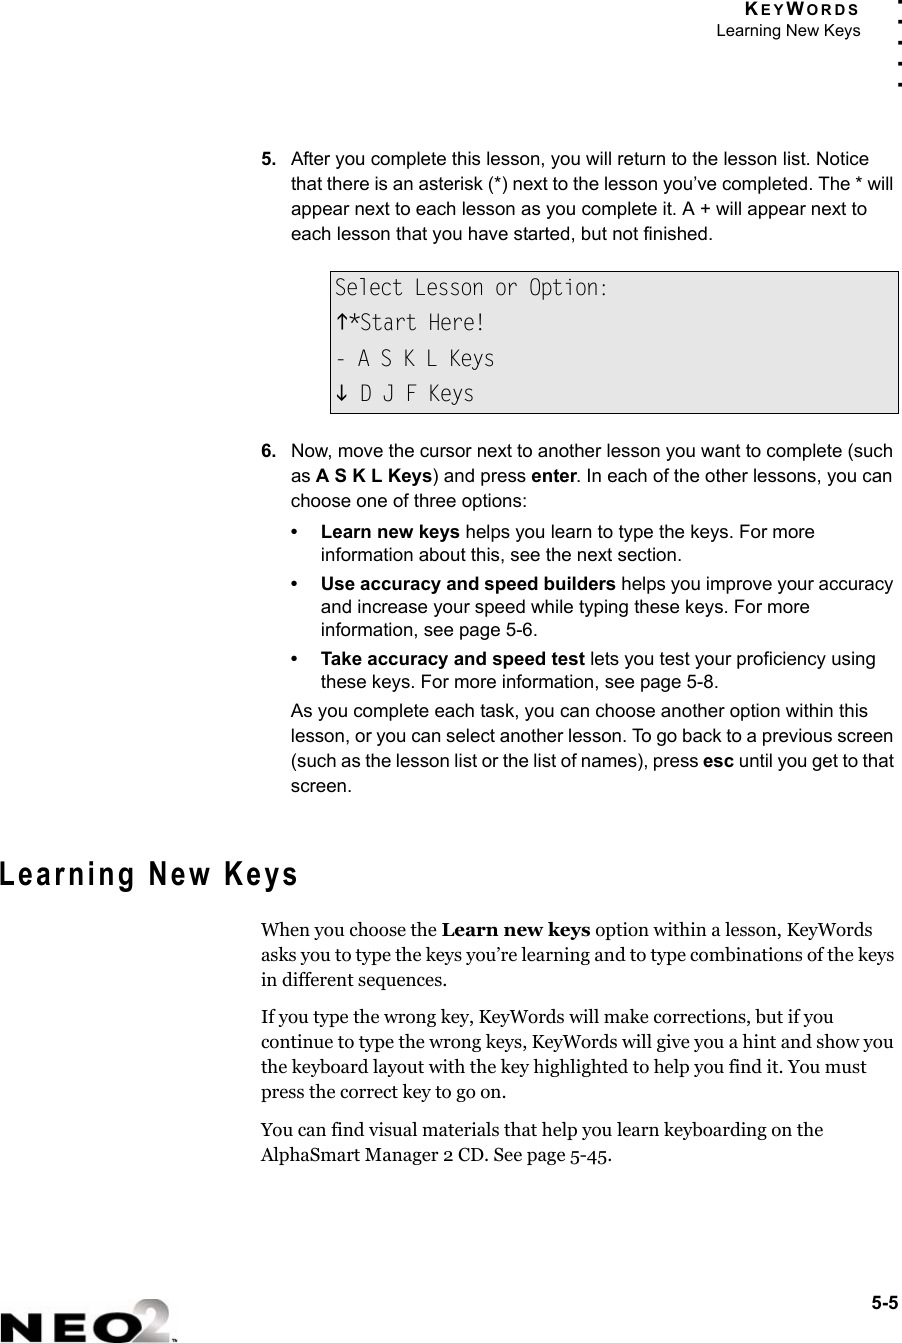 KEYWORDSLearning New Keys5-5. . . . .5. After you complete this lesson, you will return to the lesson list. Notice that there is an asterisk (*) next to the lesson you’ve completed. The * will appear next to each lesson as you complete it. A + will appear next to each lesson that you have started, but not finished.6. Now, move the cursor next to another lesson you want to complete (such as A S K L Keys) and press enter. In each of the other lessons, you can choose one of three options:• Learn new keys helps you learn to type the keys. For more information about this, see the next section.• Use accuracy and speed builders helps you improve your accuracy and increase your speed while typing these keys. For more information, see page 5-6.• Take accuracy and speed test lets you test your proficiency using these keys. For more information, see page 5-8.As you complete each task, you can choose another option within this lesson, or you can select another lesson. To go back to a previous screen (such as the lesson list or the list of names), press esc until you get to that screen.Learning New KeysWhen you choose the Learn new keys option within a lesson, KeyWords asks you to type the keys you’re learning and to type combinations of the keys in different sequences.If you type the wrong key, KeyWords will make corrections, but if you continue to type the wrong keys, KeyWords will give you a hint and show you the keyboard layout with the key highlighted to help you find it. You must press the correct key to go on.You can find visual materials that help you learn keyboarding on the AlphaSmart Manager 2 CD. See page 5-45.Select Lesson or Option:K*Start Here!- A S K L KeysL D J F Keys